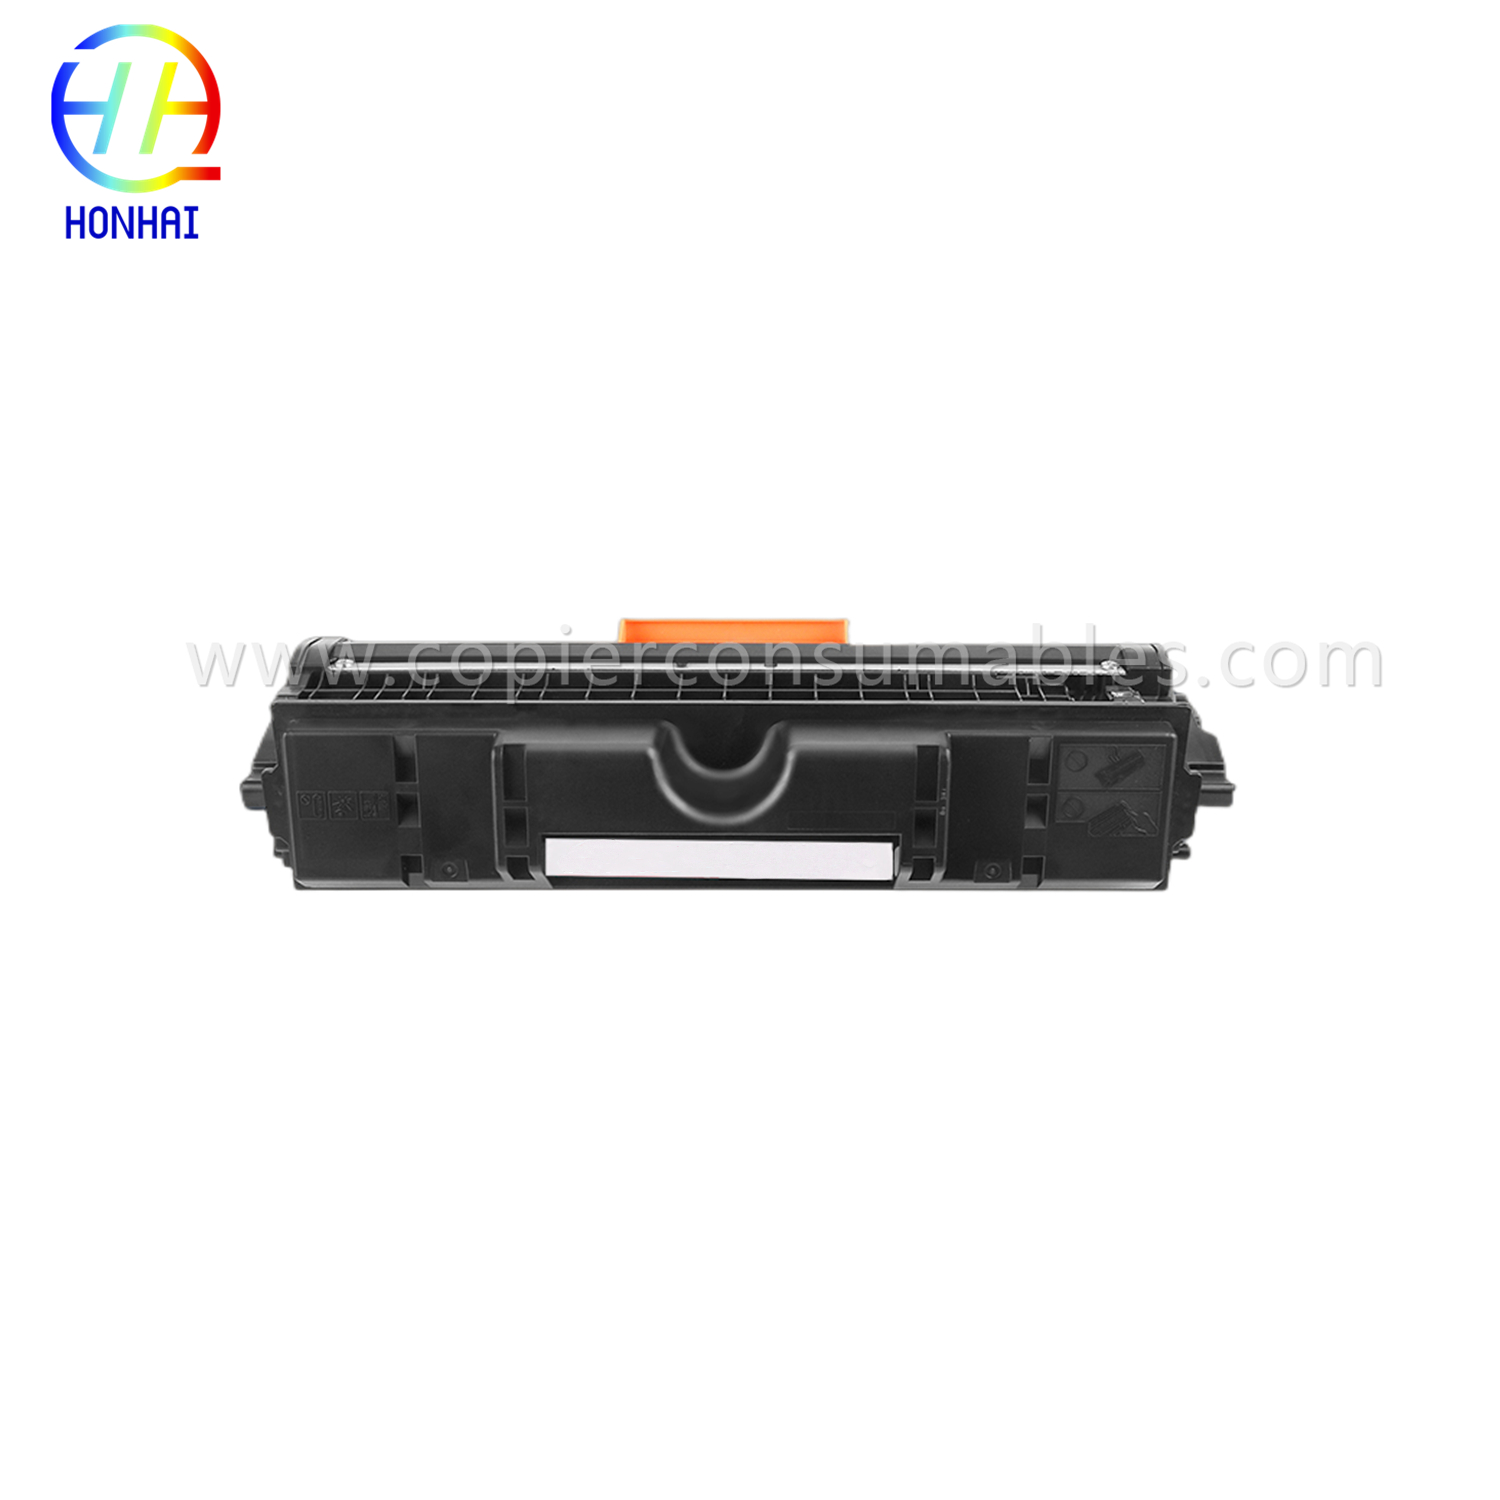 Toner Cartridge for HP CE314A (1)